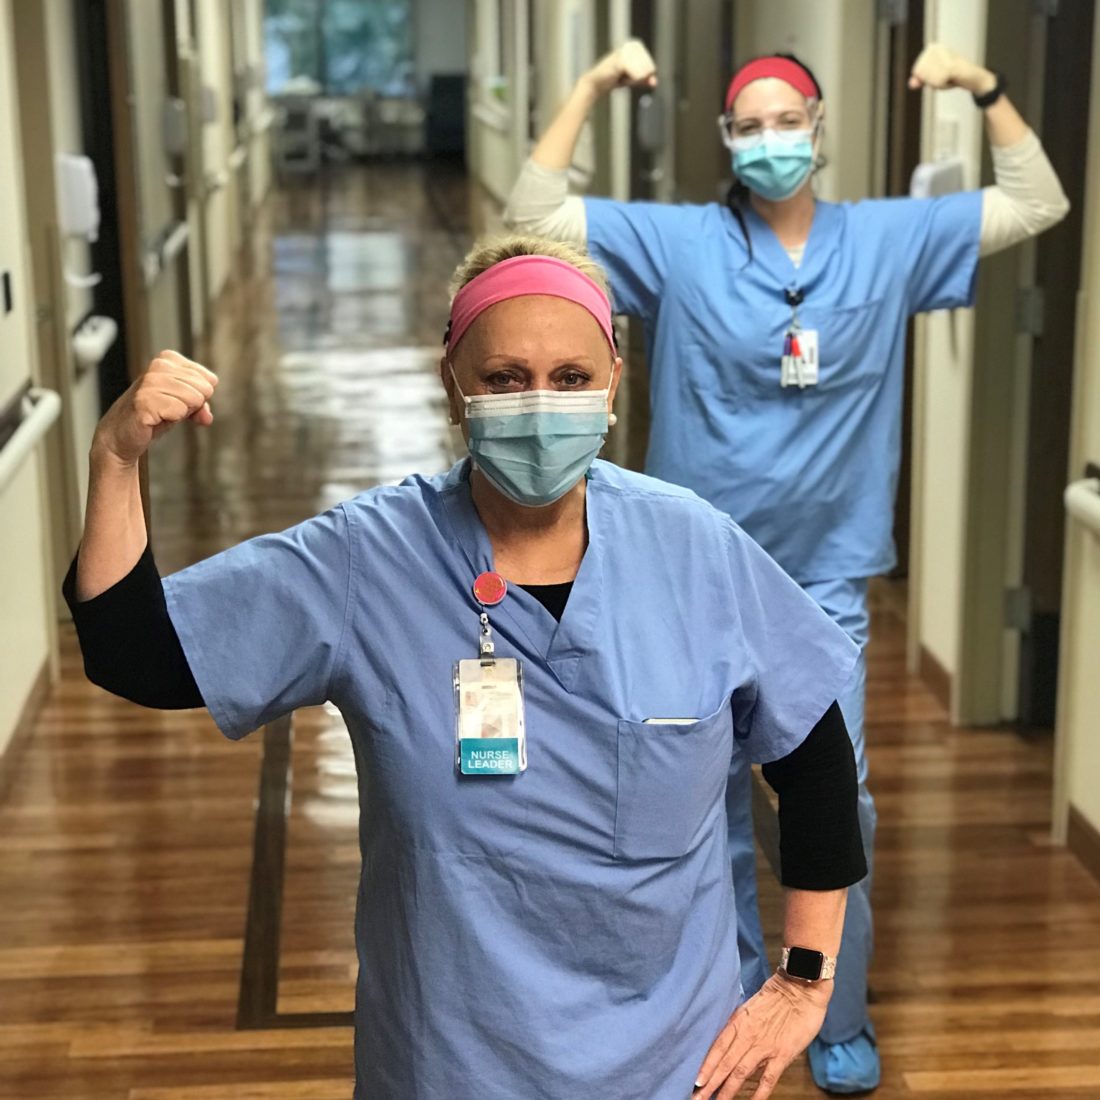 Two female nurses wearing scrubs and protective face masks while flexing their arm muscles in a hallway